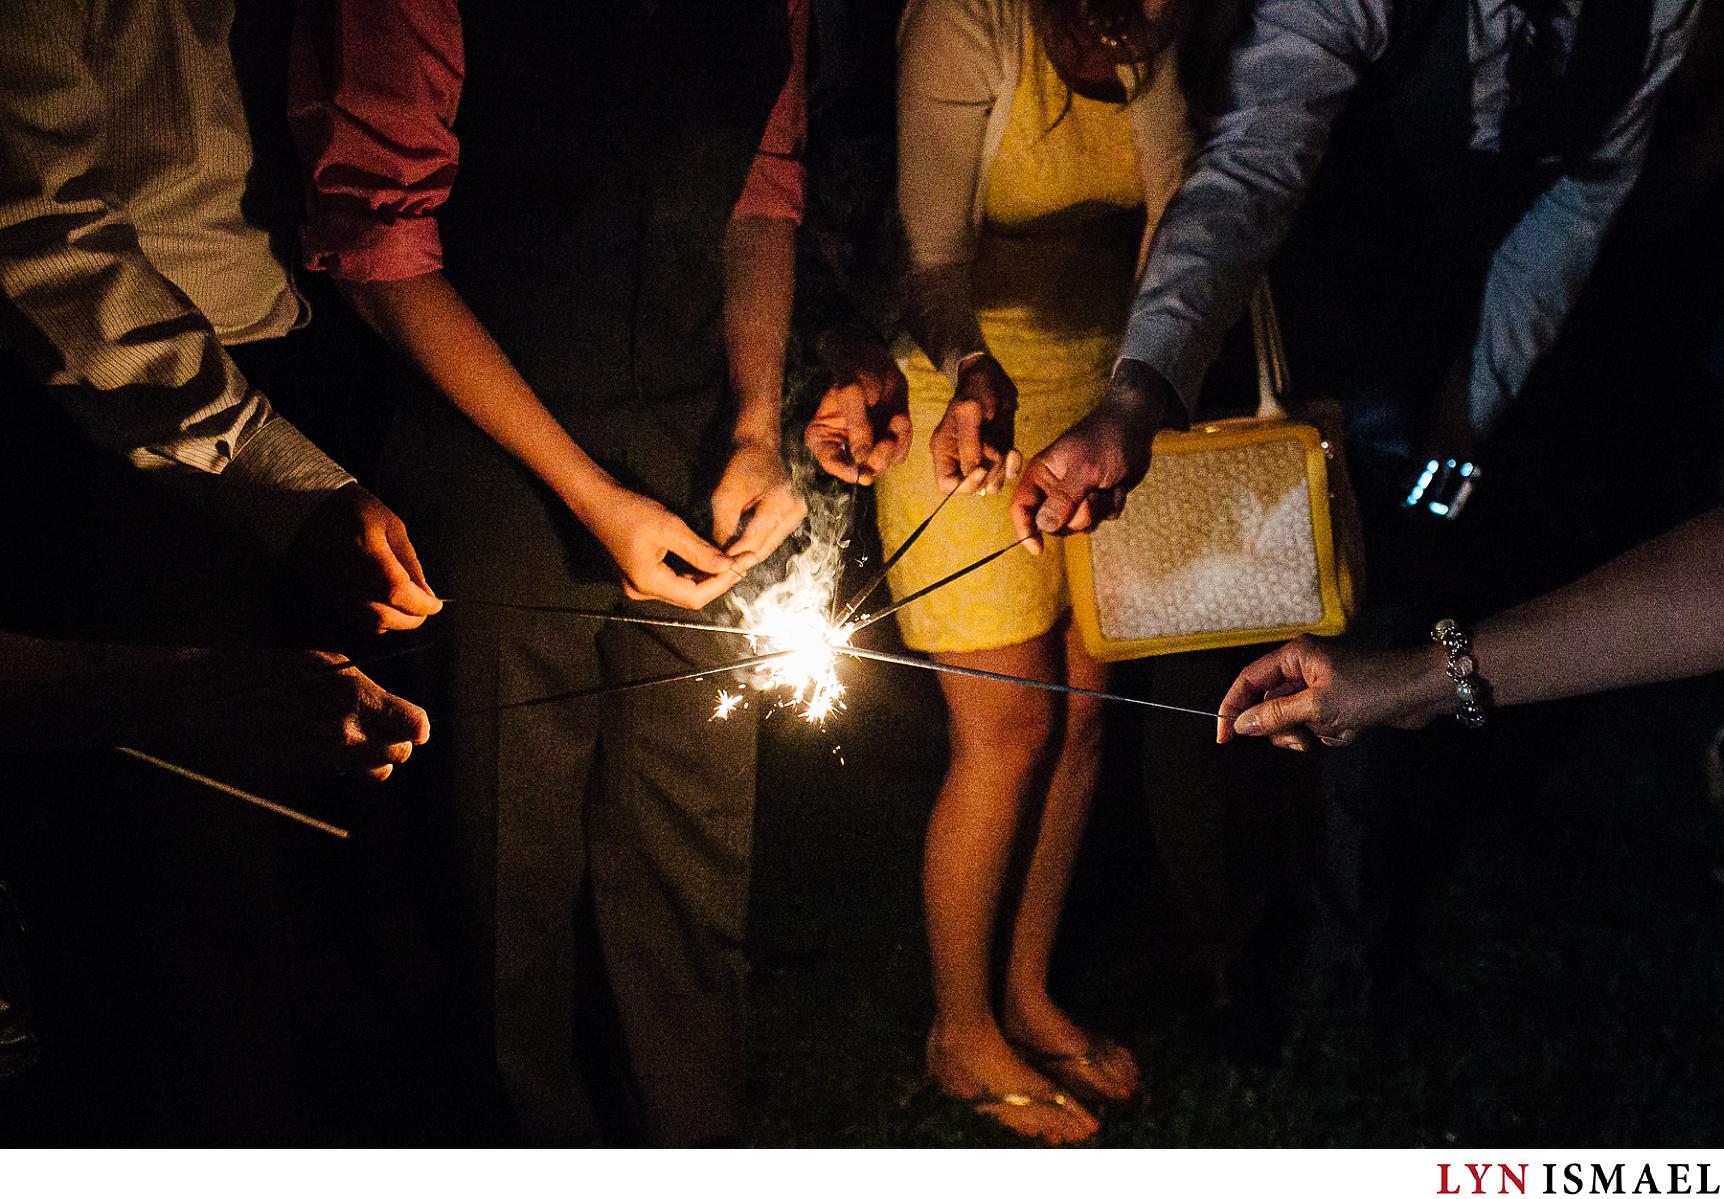 Guests light the sparklers